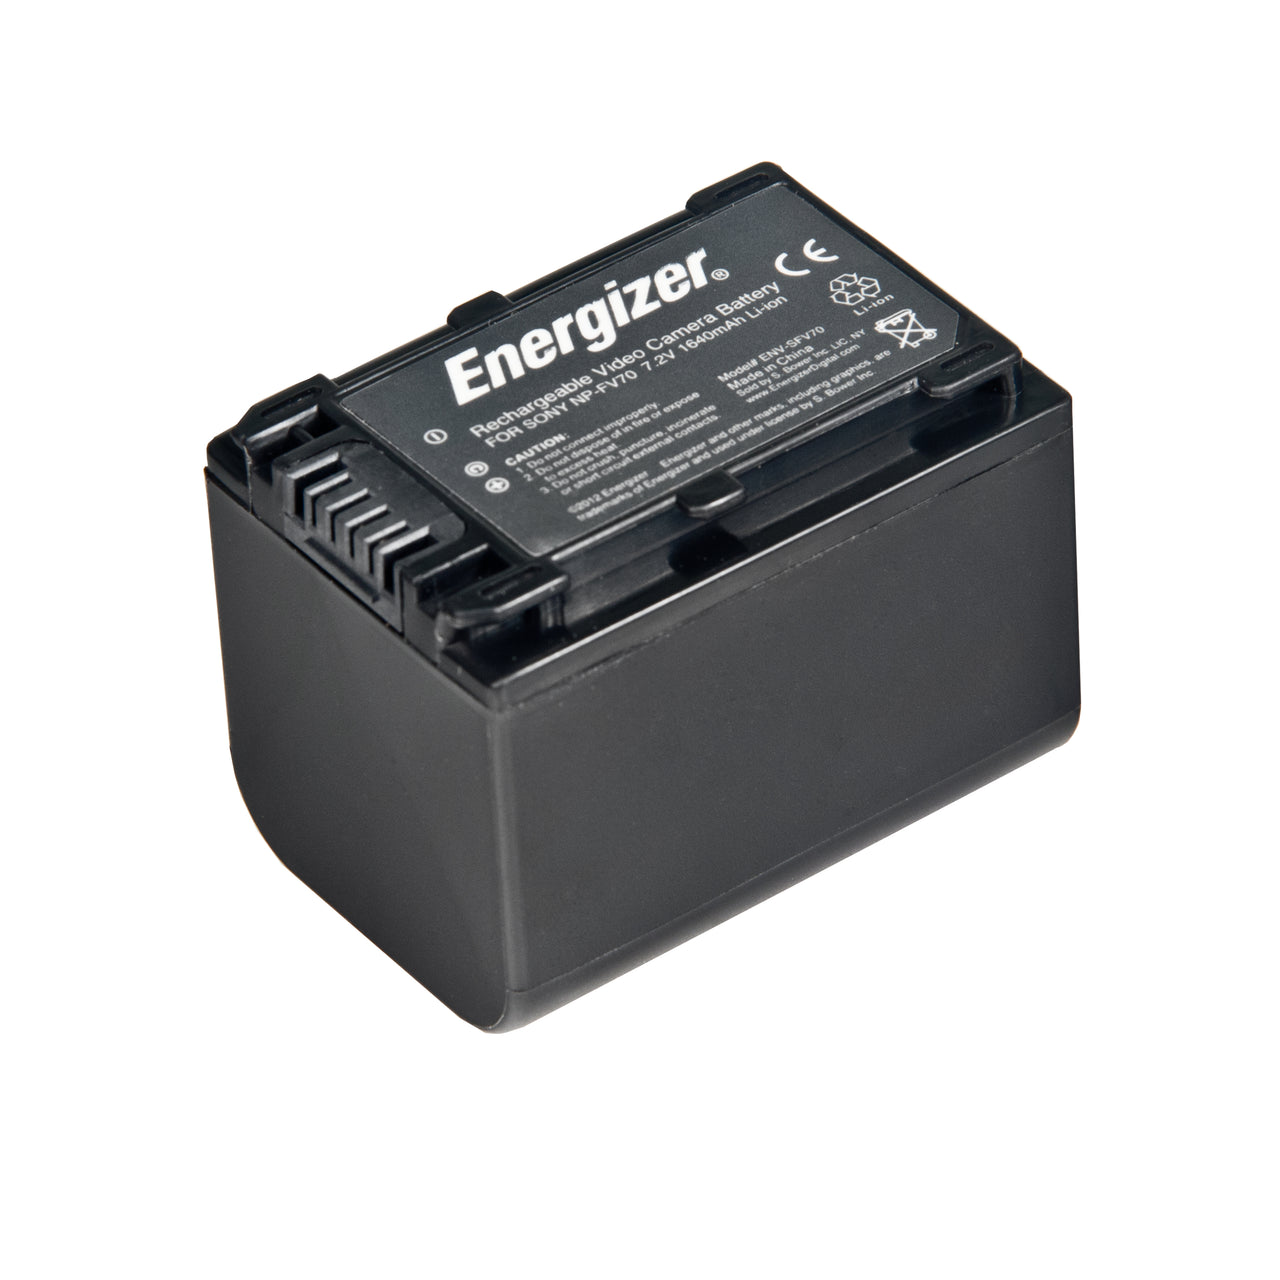 Energizer® ENV-SFV70 Digital Replacement Battery for Sony NP-FV70